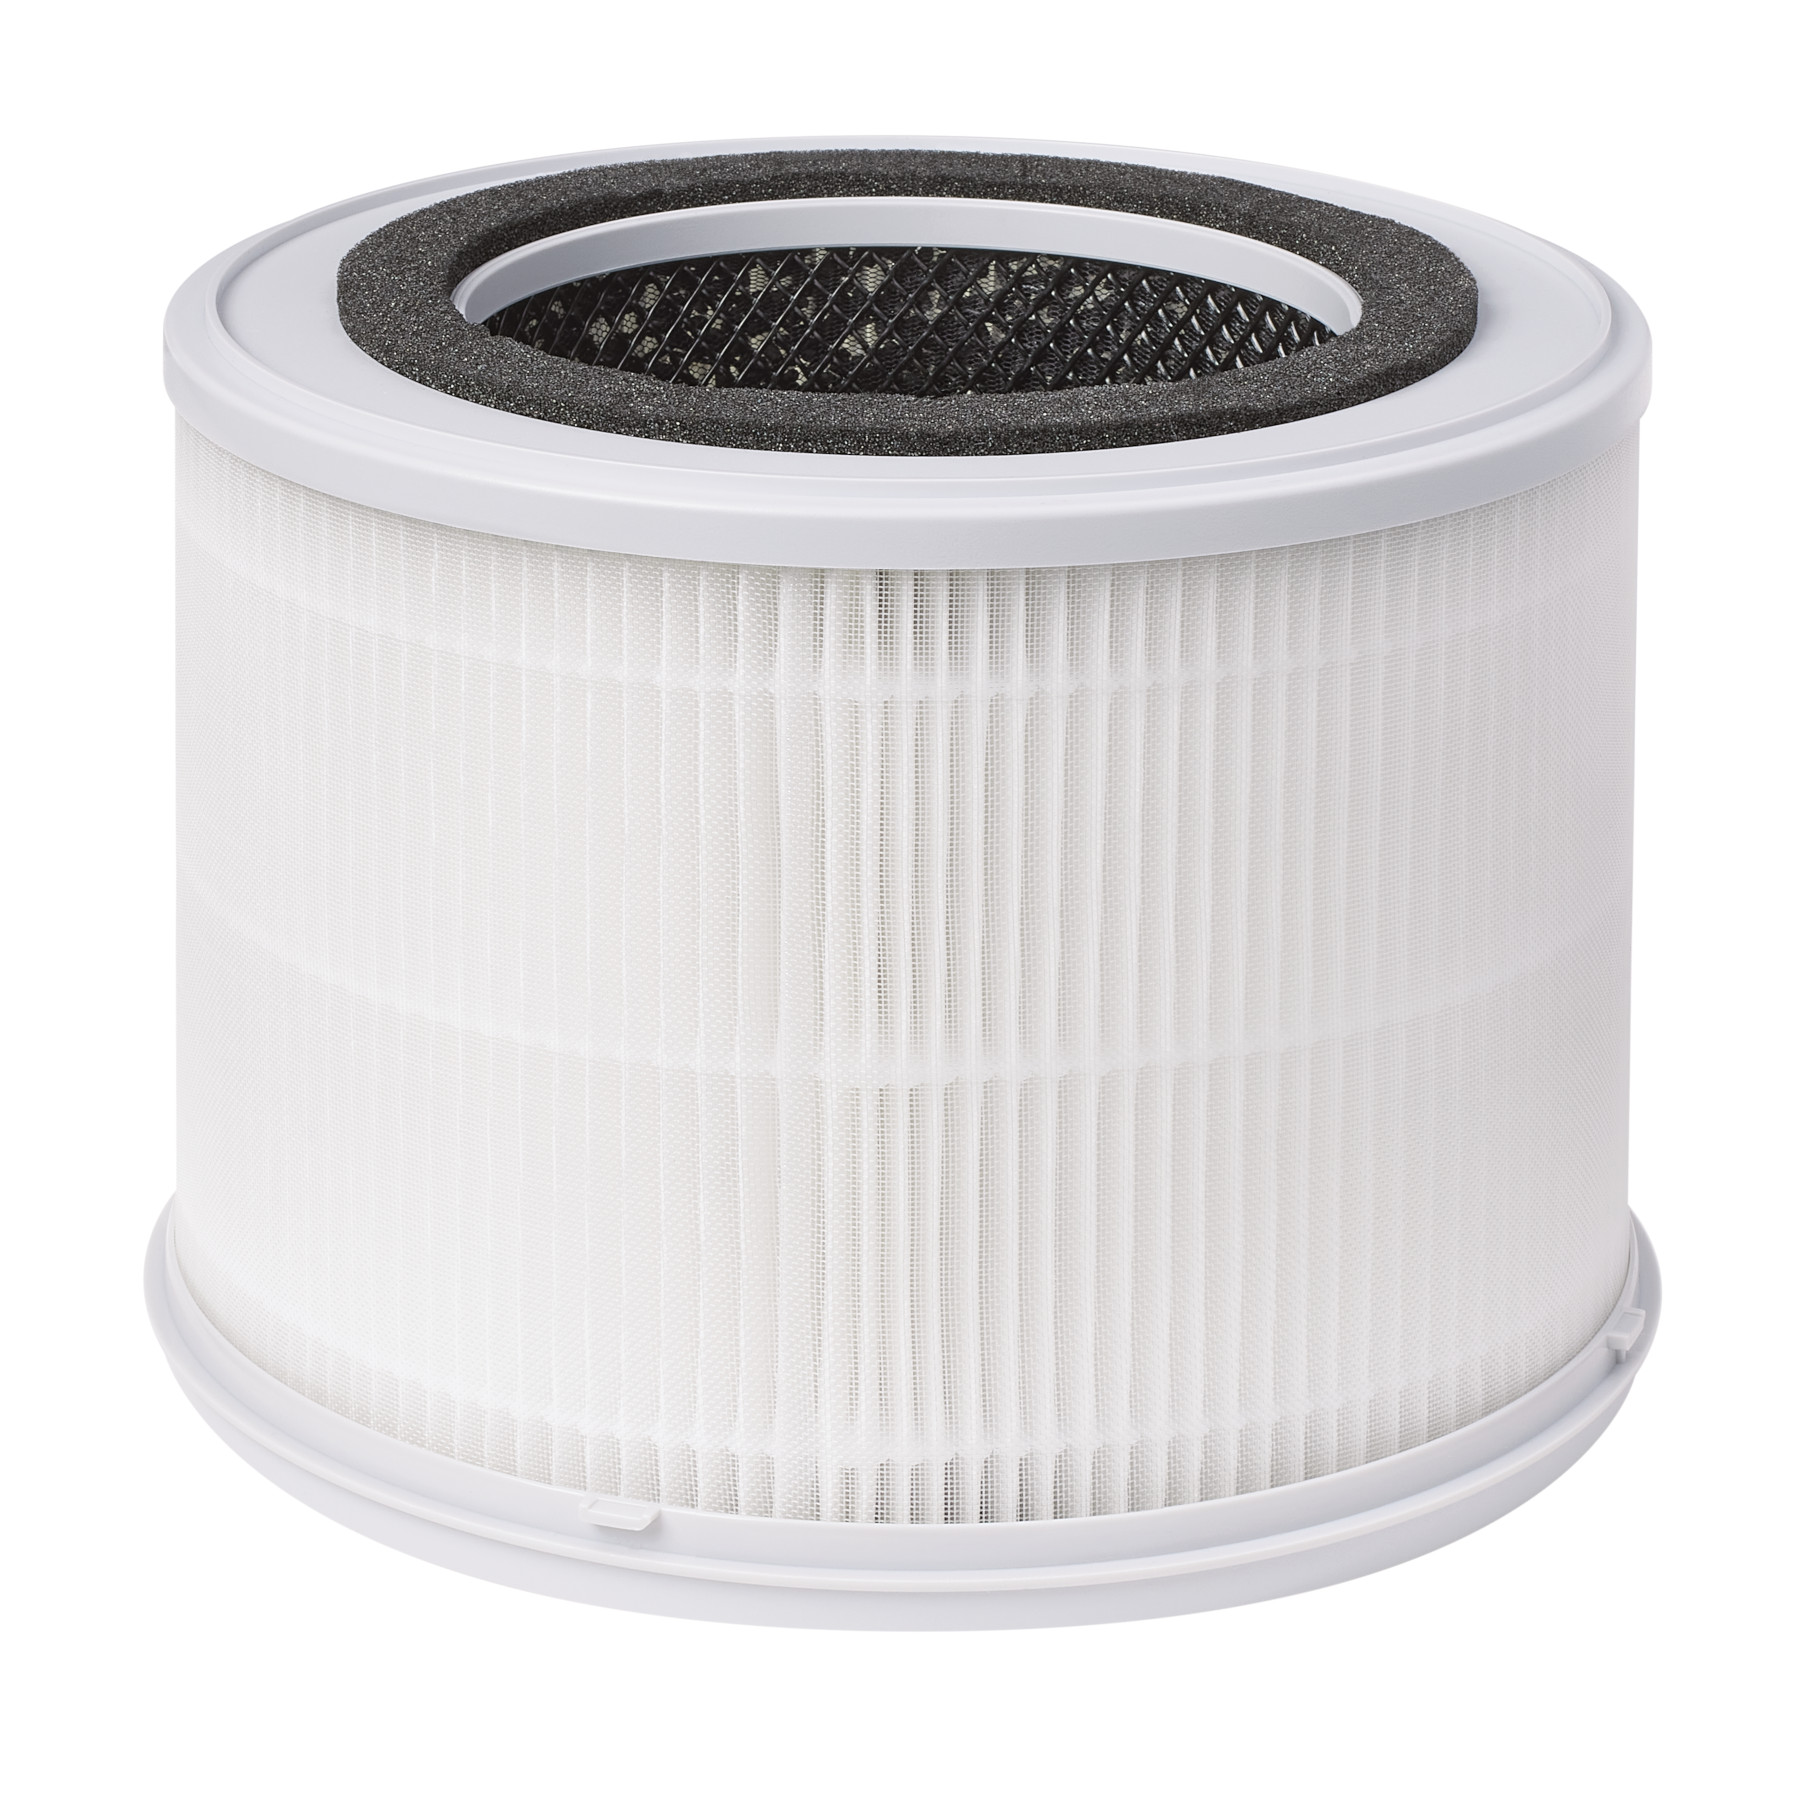 Broan-NuTone Air Purifier Replacement Filter